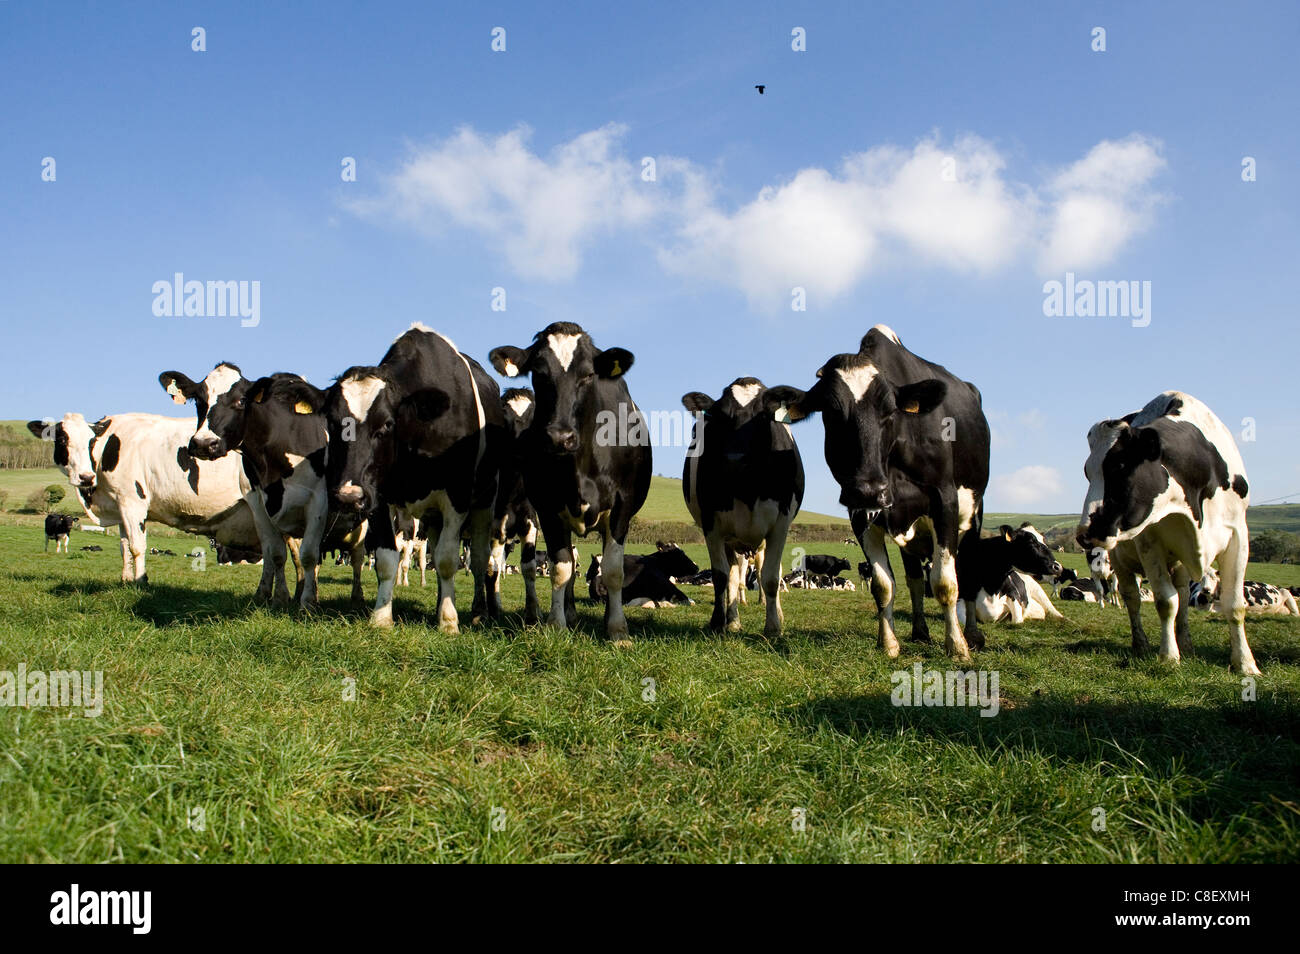 Dairy cattle Group of adults in a field Dorset, UK Stock Photo